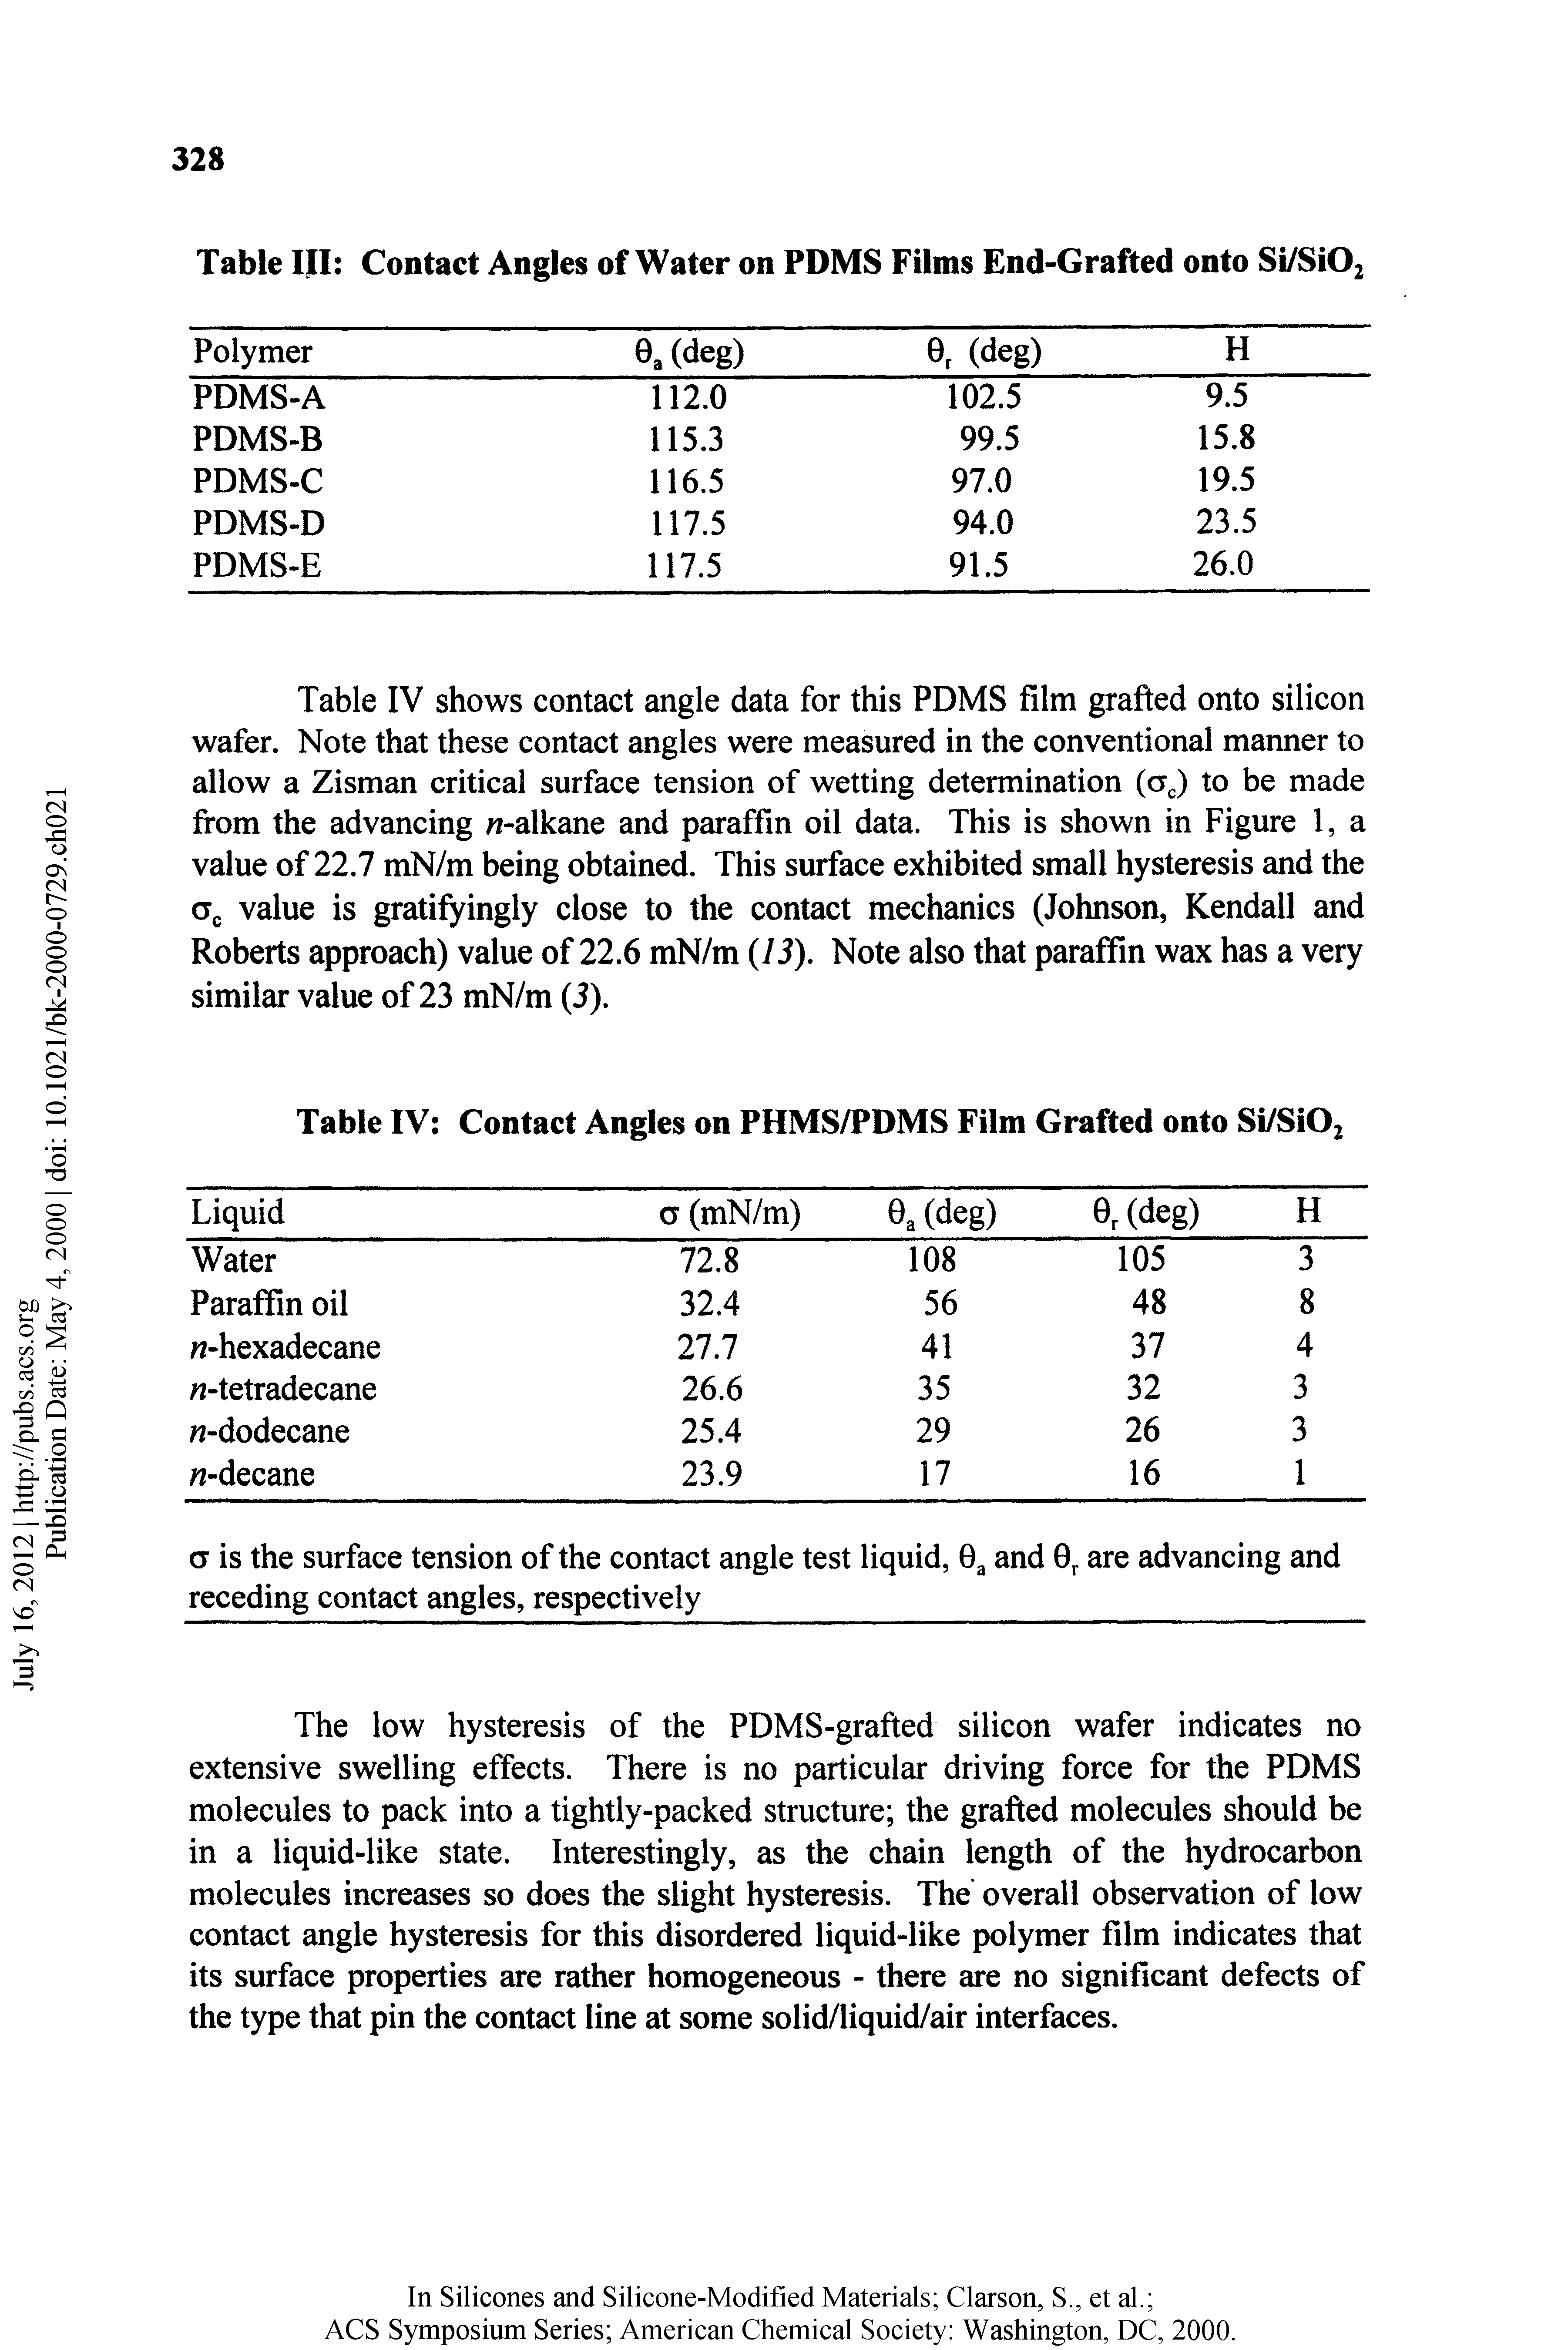 Table IV shows contact angle data for this PDMS film grafted onto silicon wafer. Note that these contact angles were measured in the conventional manner to allow a Zisman critical surface tension of wetting determination (aj to be made from the advancing -alkane and paraffin oil data. This is shown in Figure 1, a value of 22.7 mN/m being obtained. This surface exhibited small hysteresis and the value is gratifyingly close to the contact mechanics (Johnson, Kendall and Roberts approach) value of 22.6 mN/m (13). Note also that paraffin wax has a very similar value of 23 mN/m (3),...